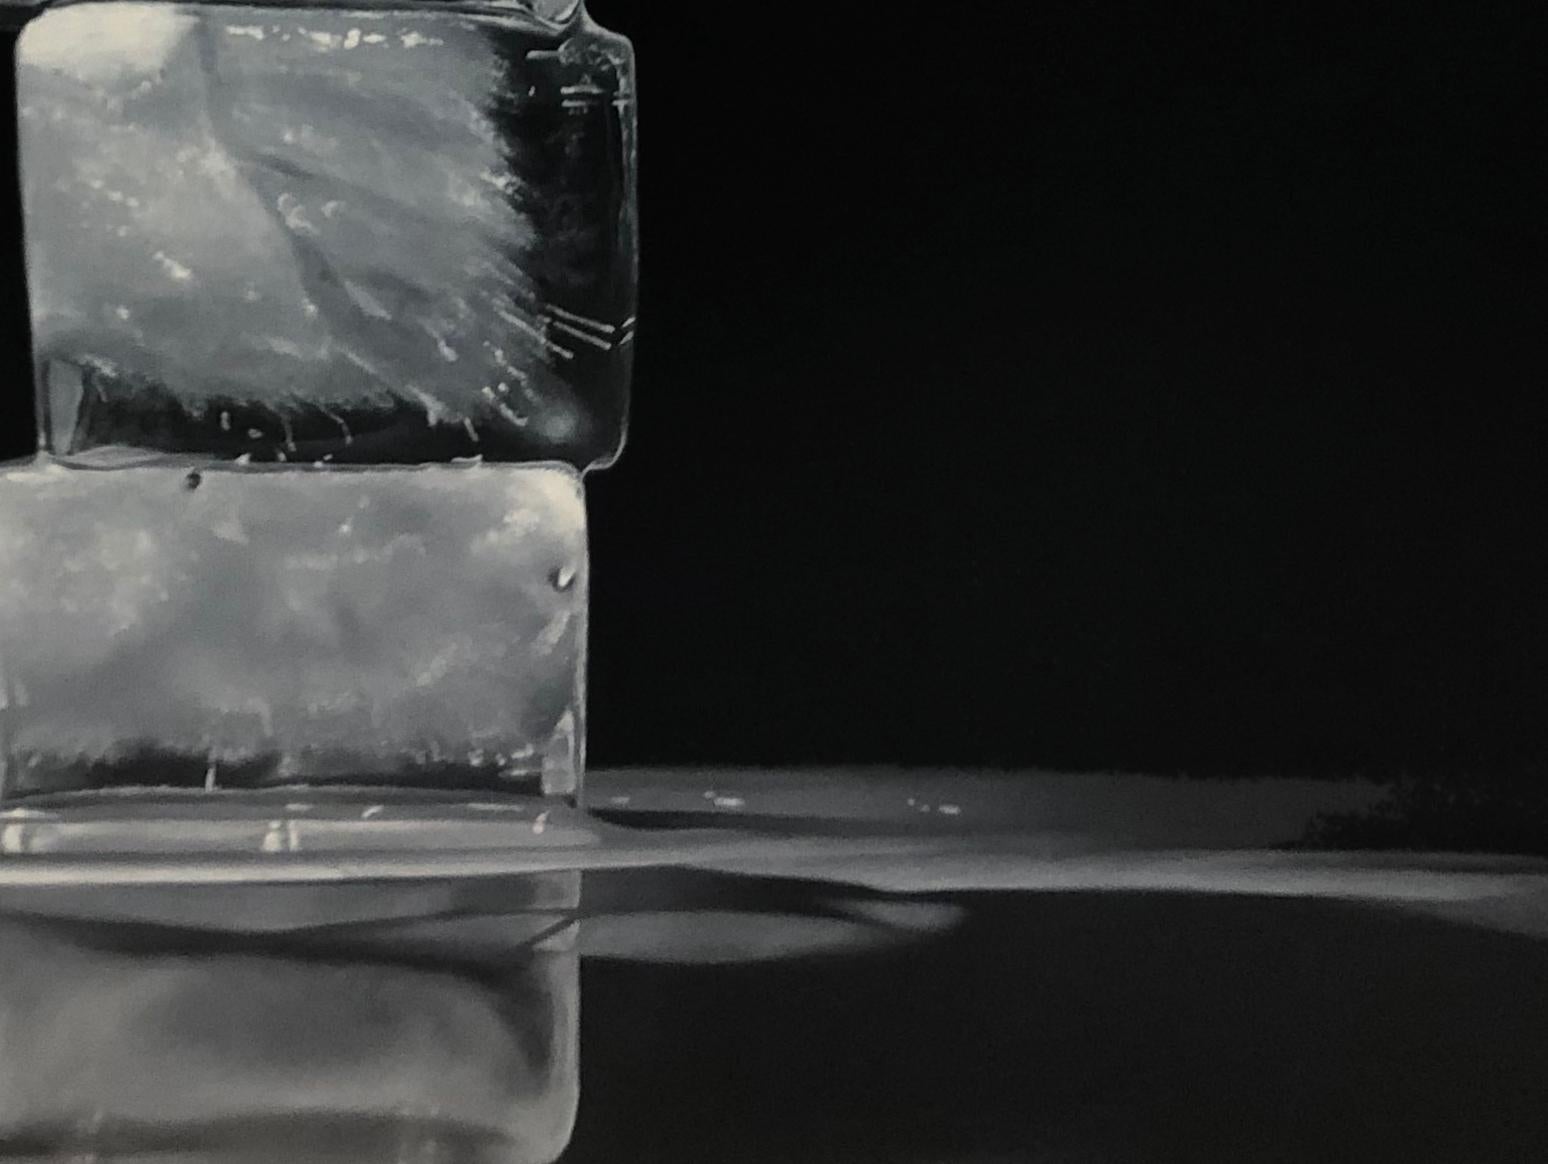 RISE AND FALL, OBELISK 2, photo-realism, black and white, monochrome, ice cubes - Contemporary Painting by Kevin Palme